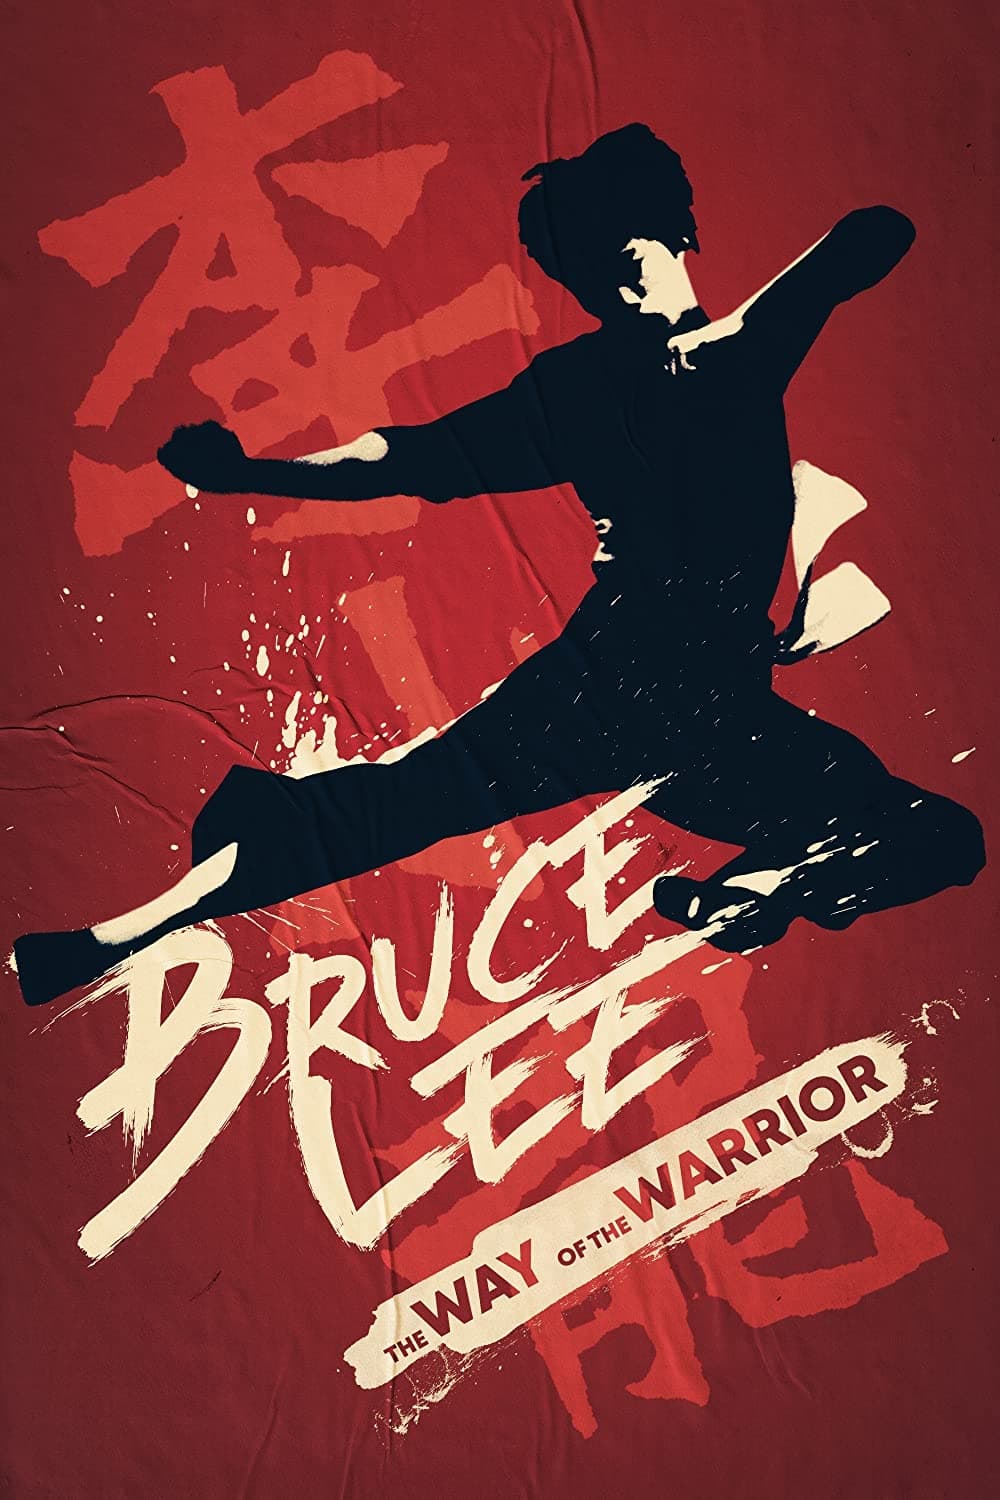 Bruce Lee: The Way of the Warrior